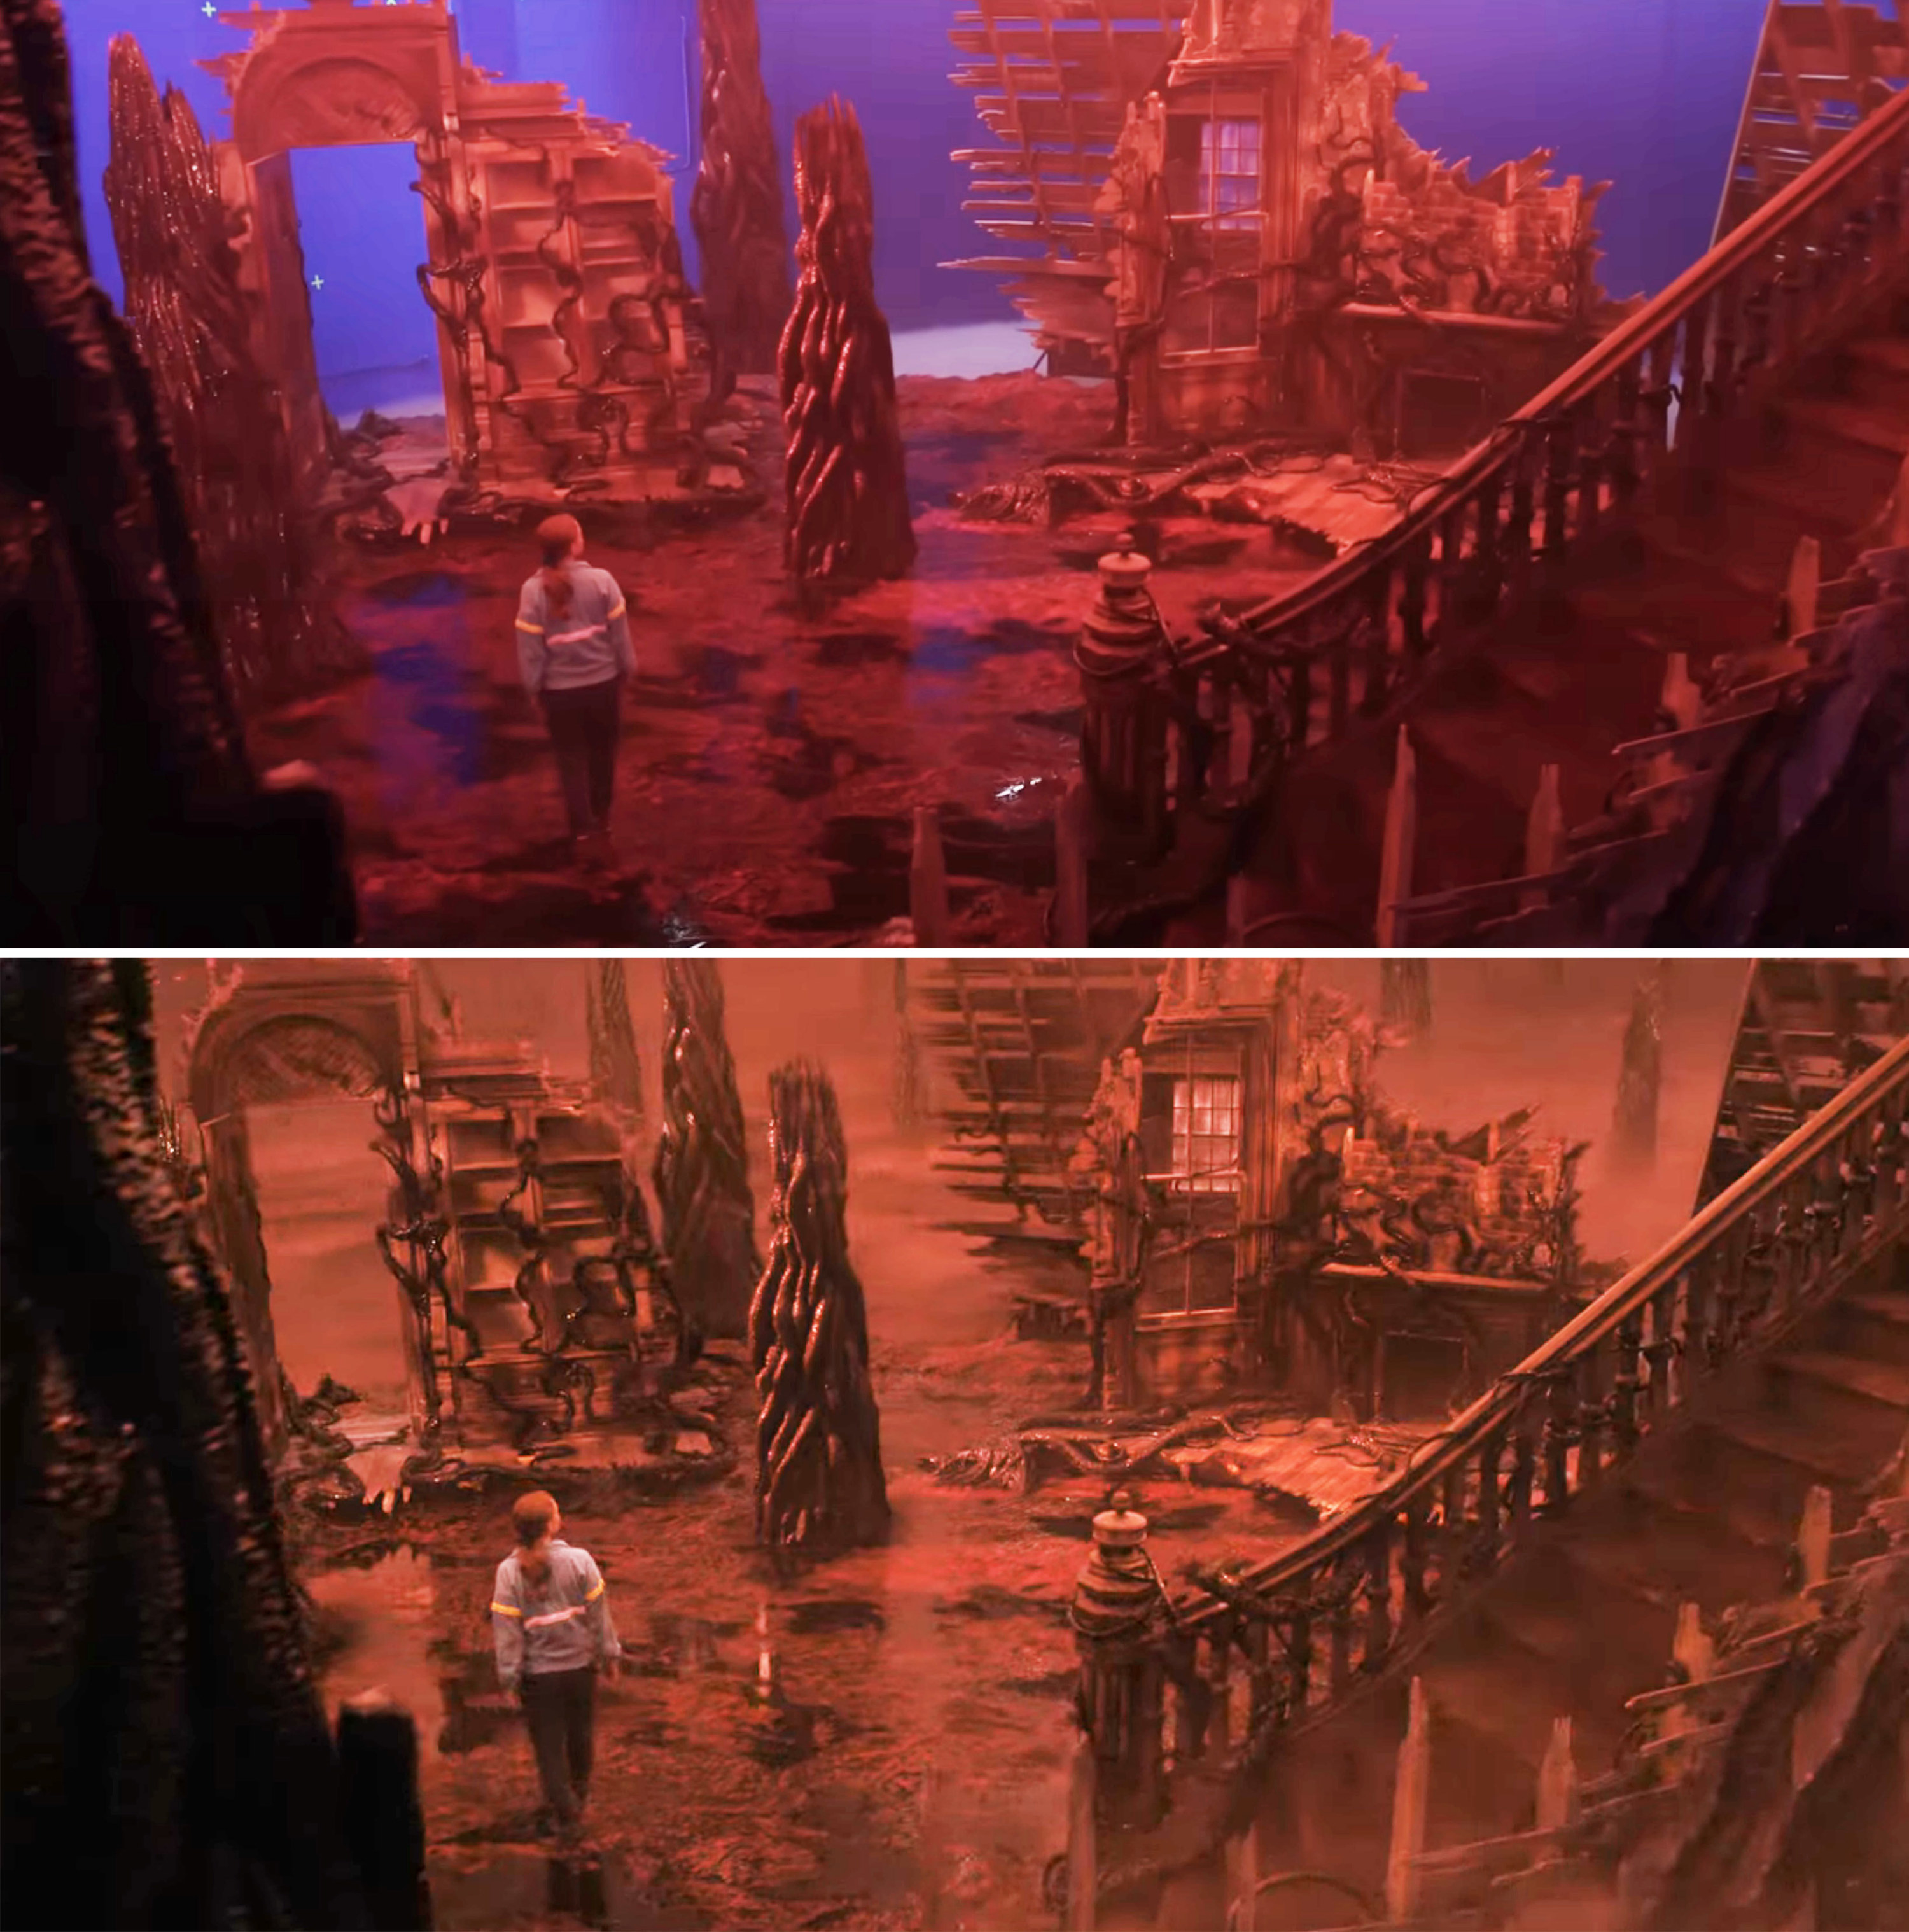 Max walking through the Upside Down creel house behind the scenes vs in the show